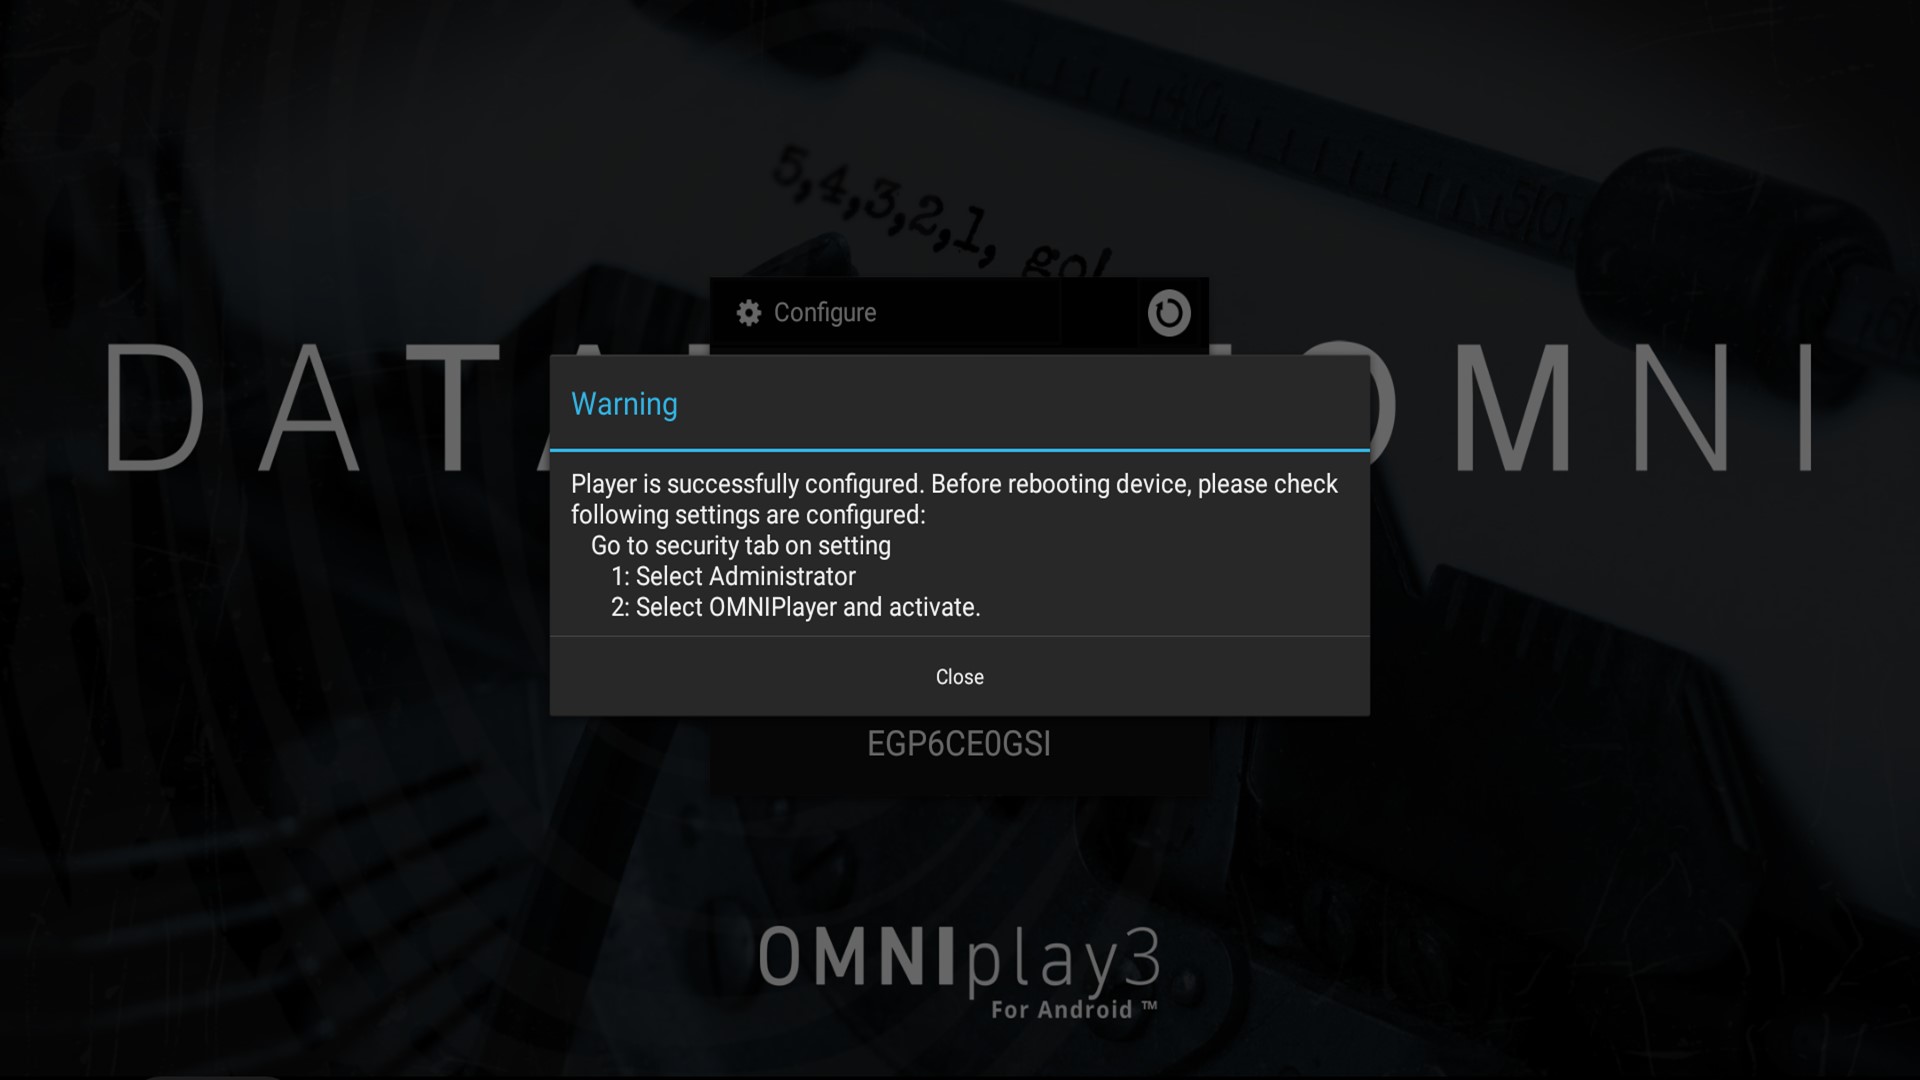 Compleating the configuration of OMNIplay3